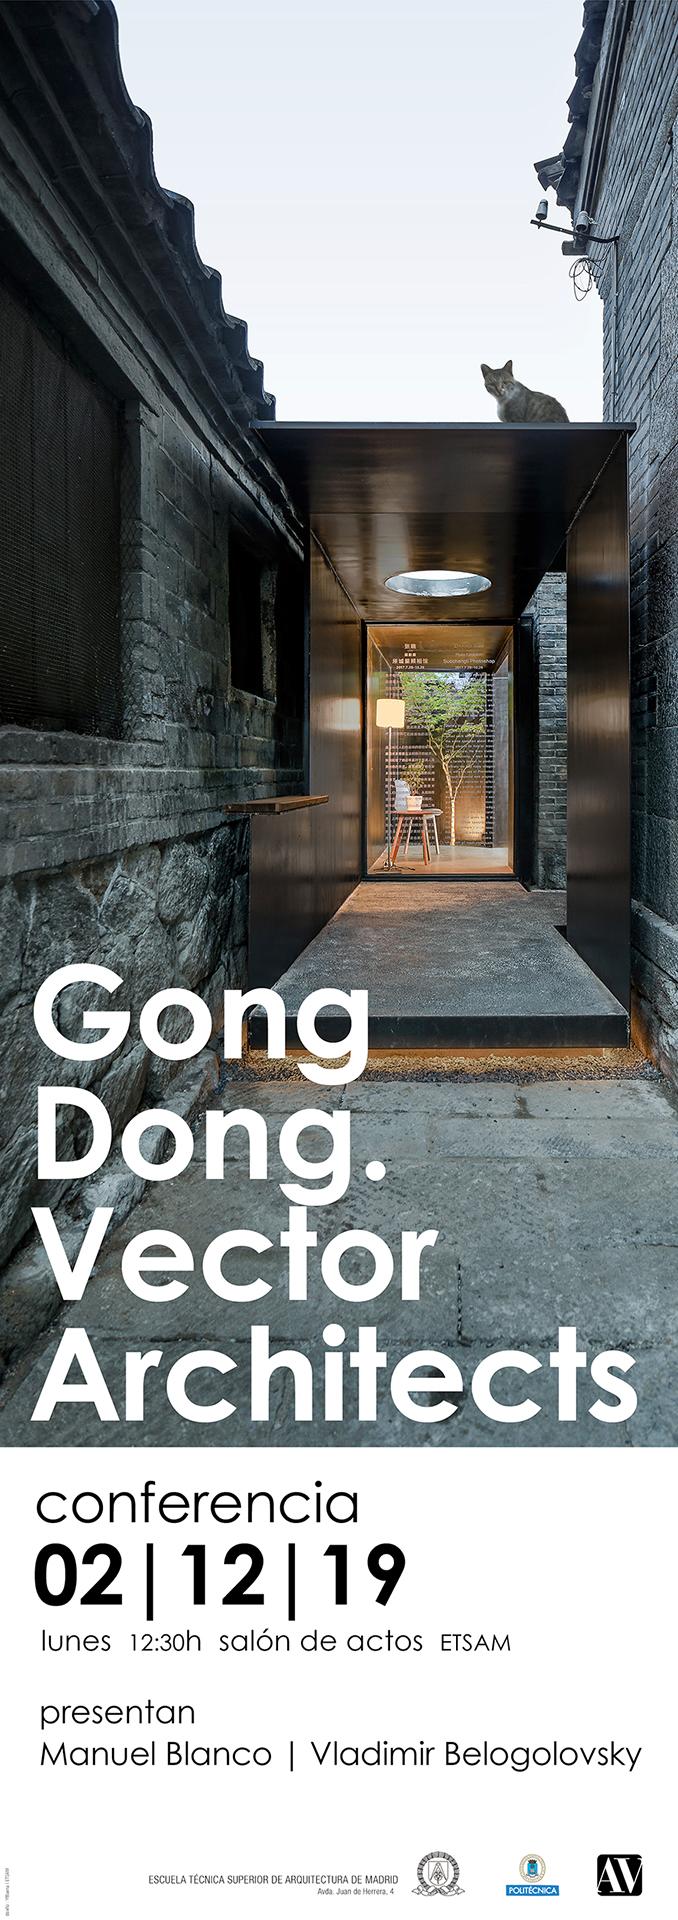 Gong Dong. Vector Architects